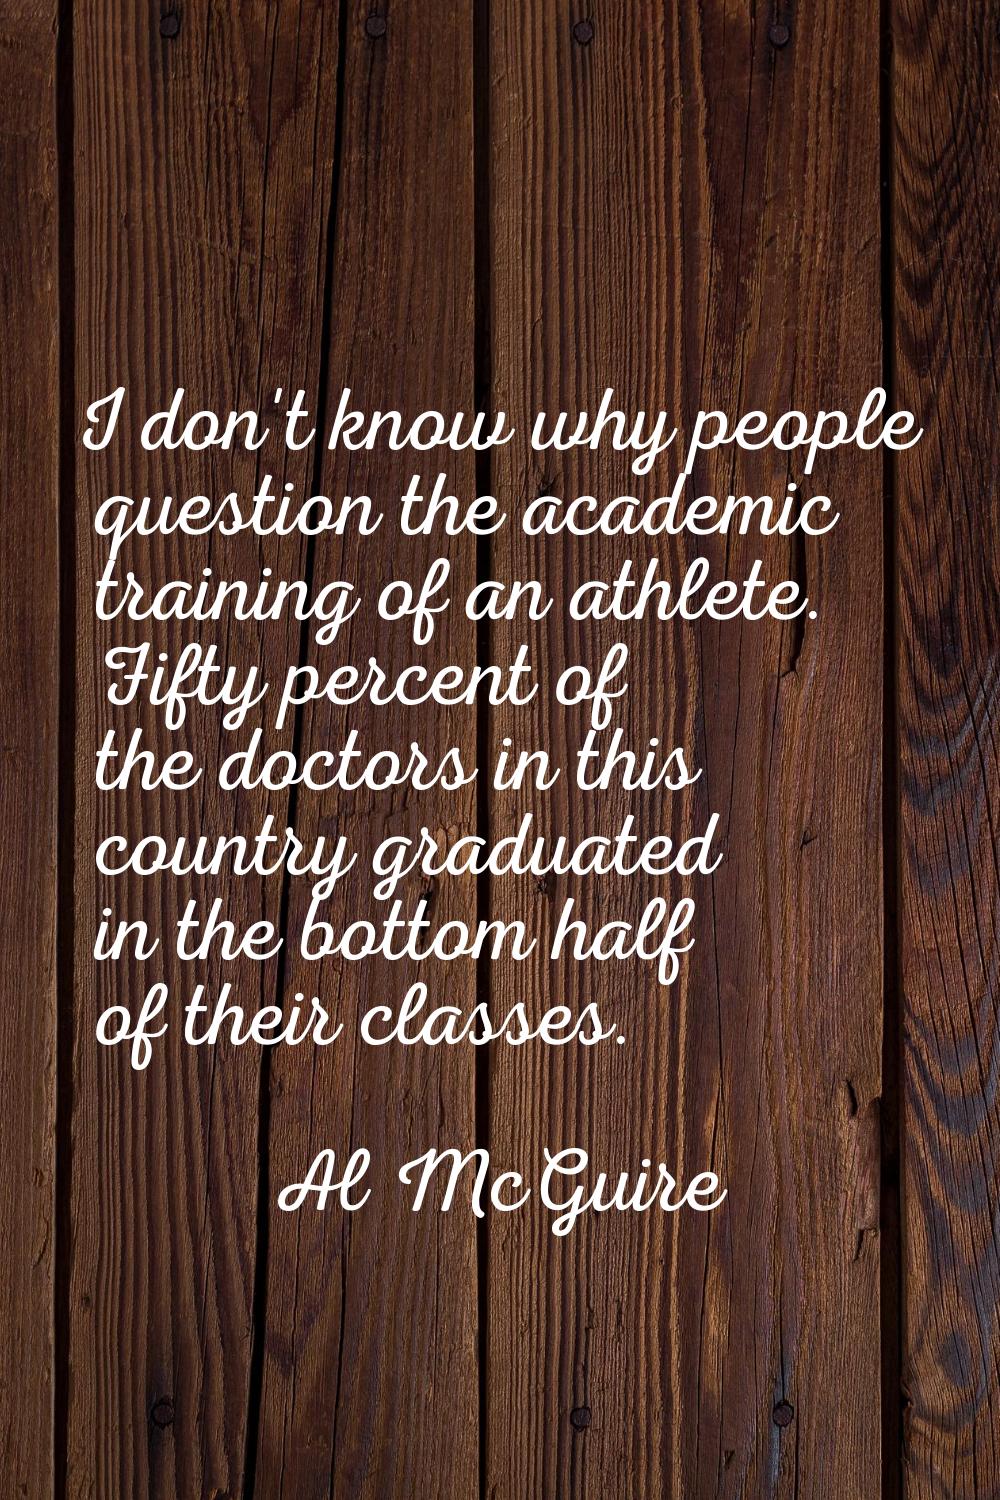 I don't know why people question the academic training of an athlete. Fifty percent of the doctors 